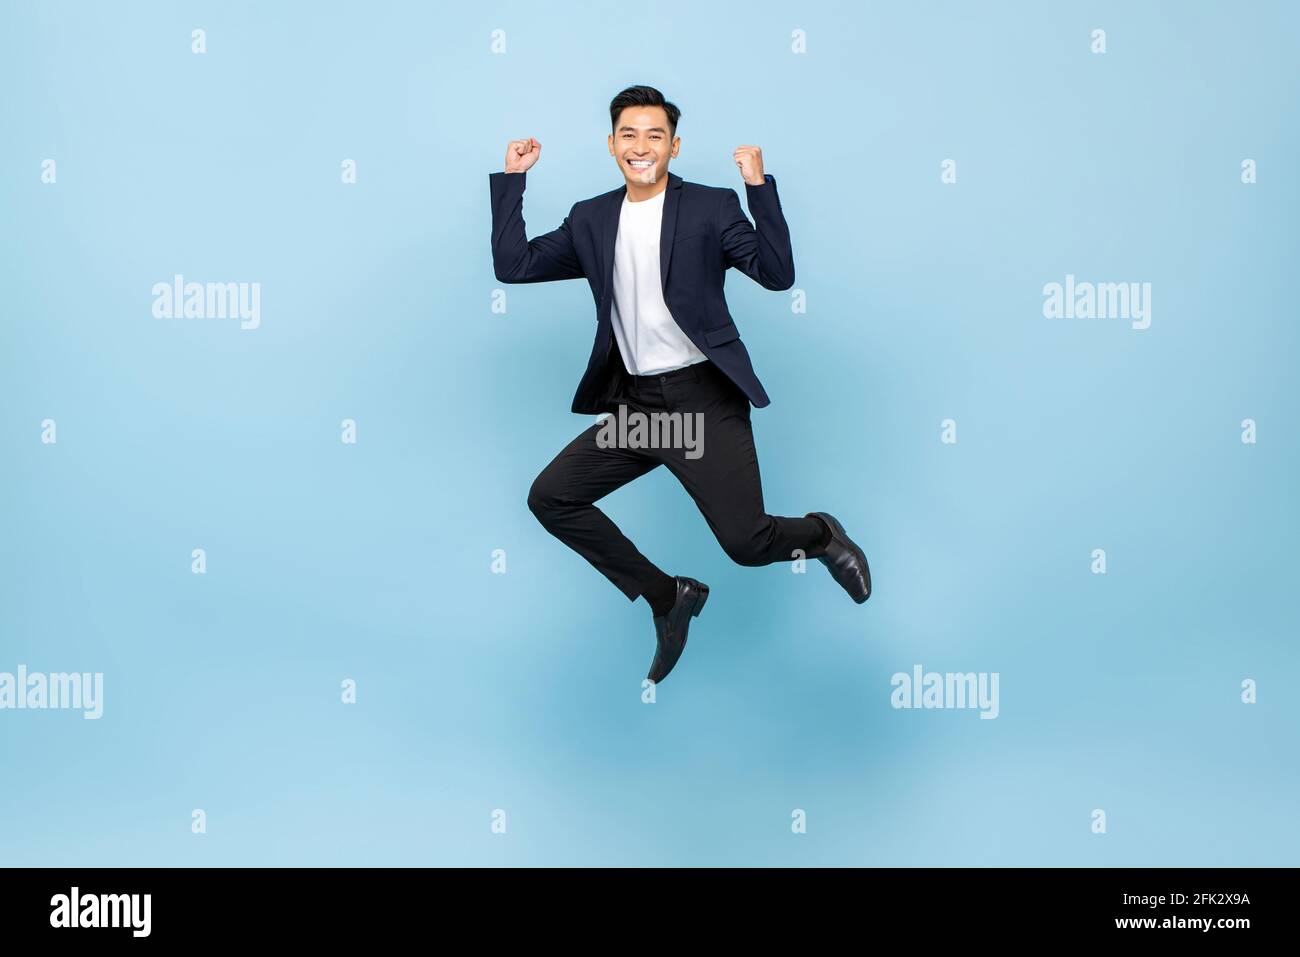 Full lenght portrait of smiling handsome Asian man jumping and raising  his fists on isolated light blue studio background Stock Photo